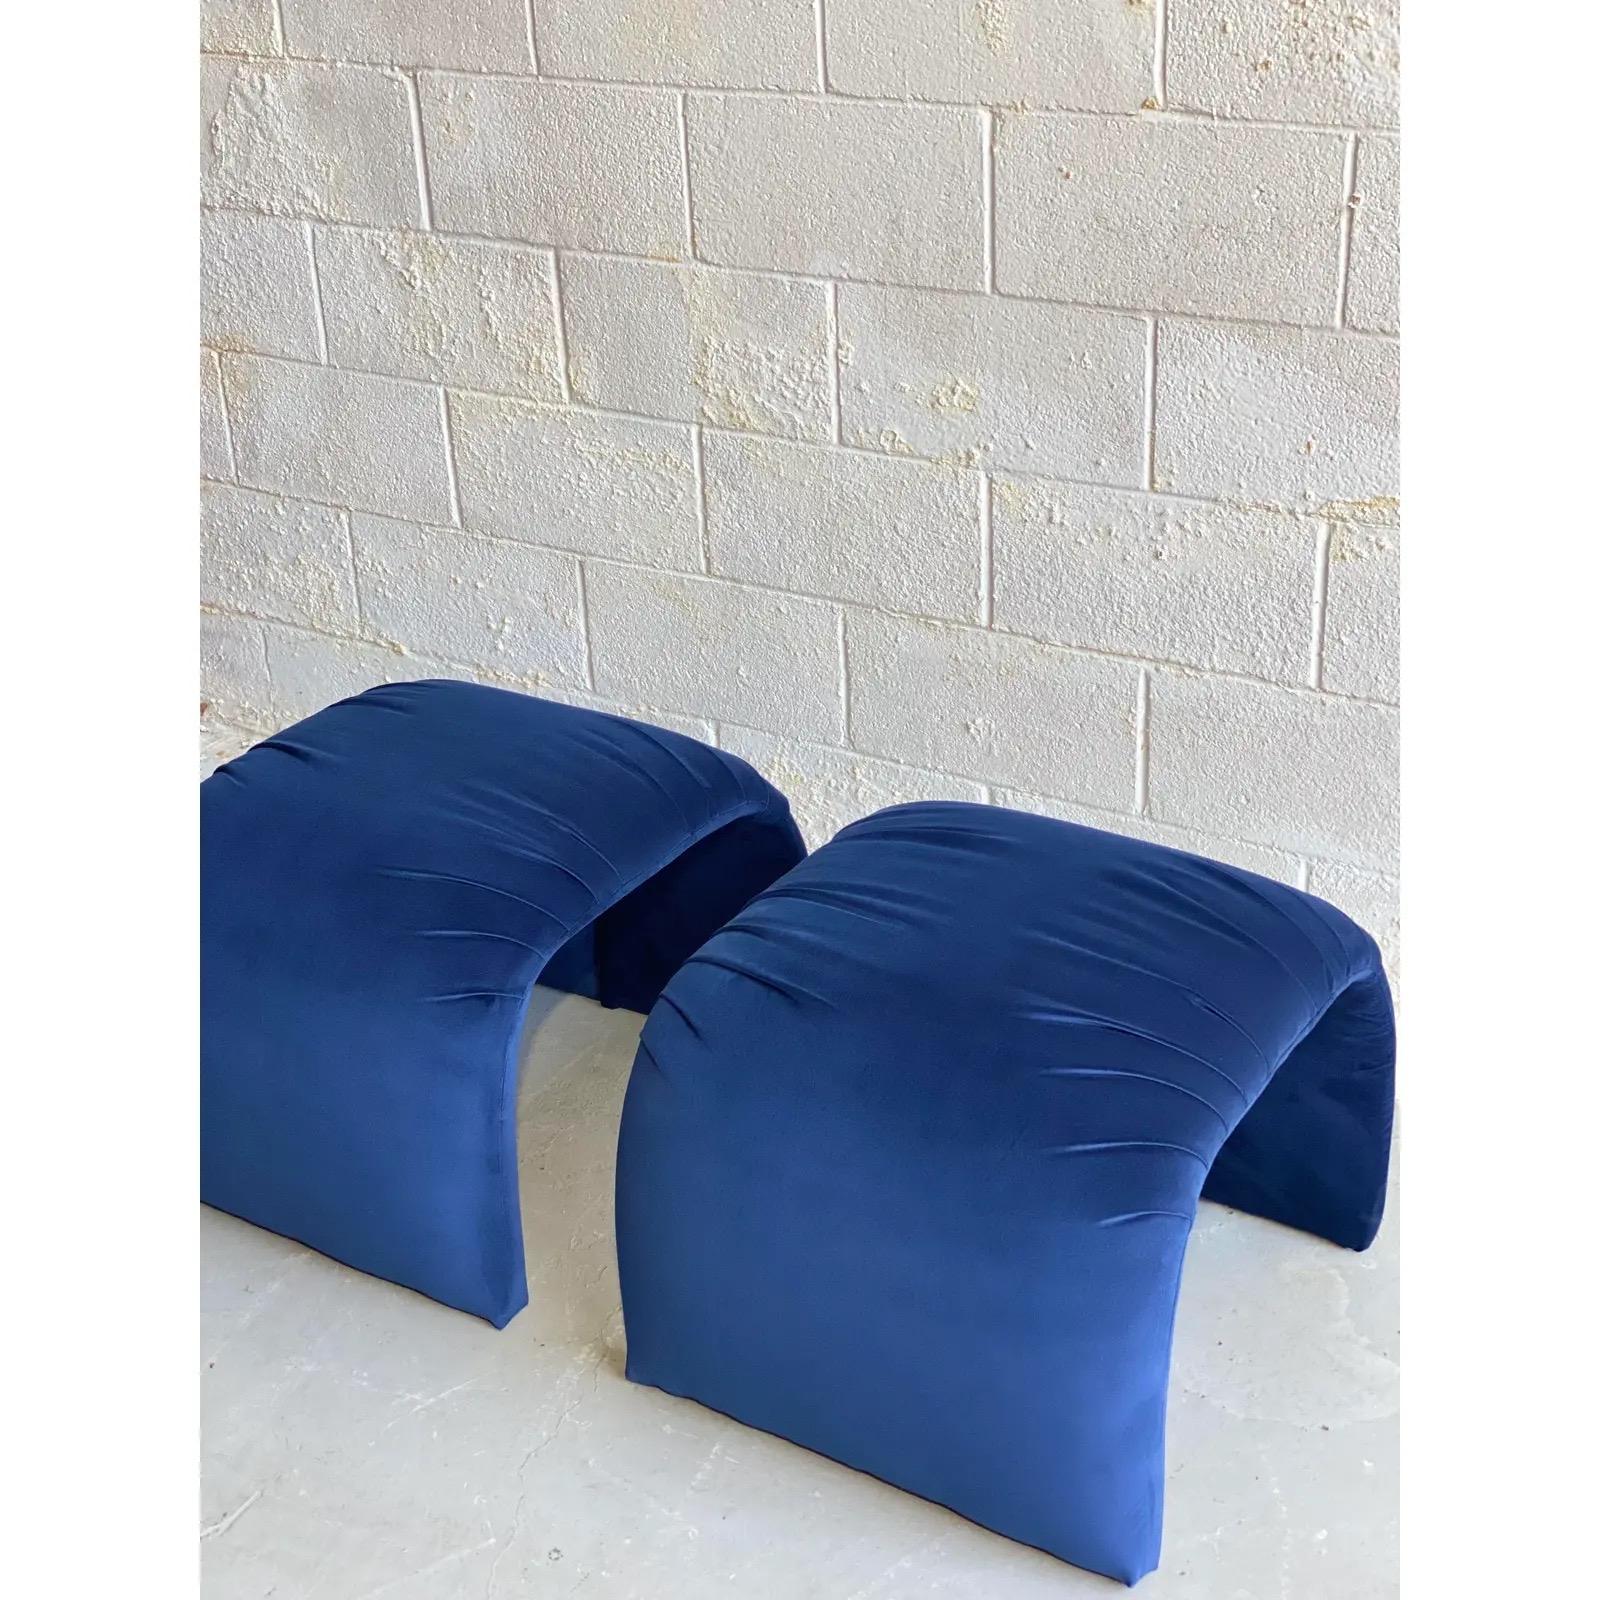 Fabric 1980s Vintage Waterfall Blue Upholstered Ottomans, a Pair For Sale